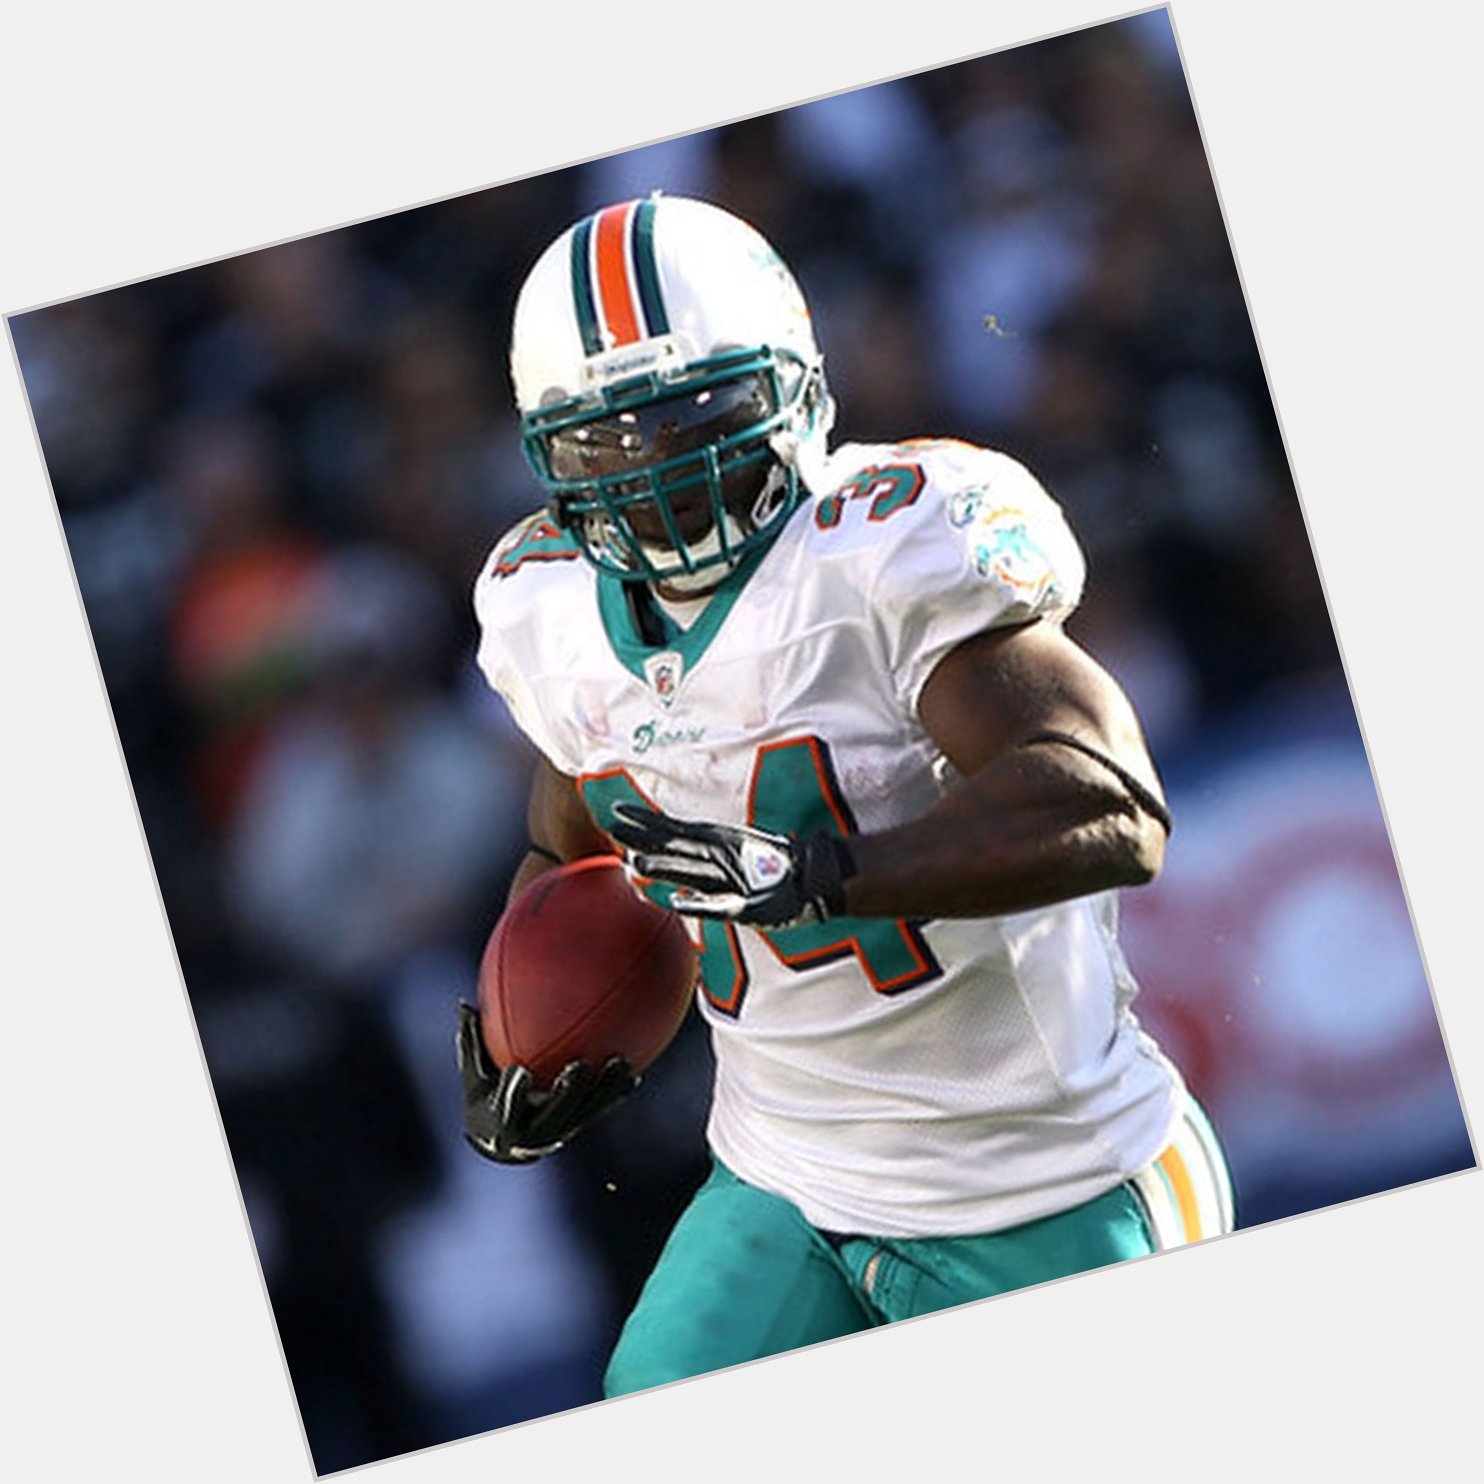 Happy birthday to Ricky Williams one of the greatest Running Back to play the game 